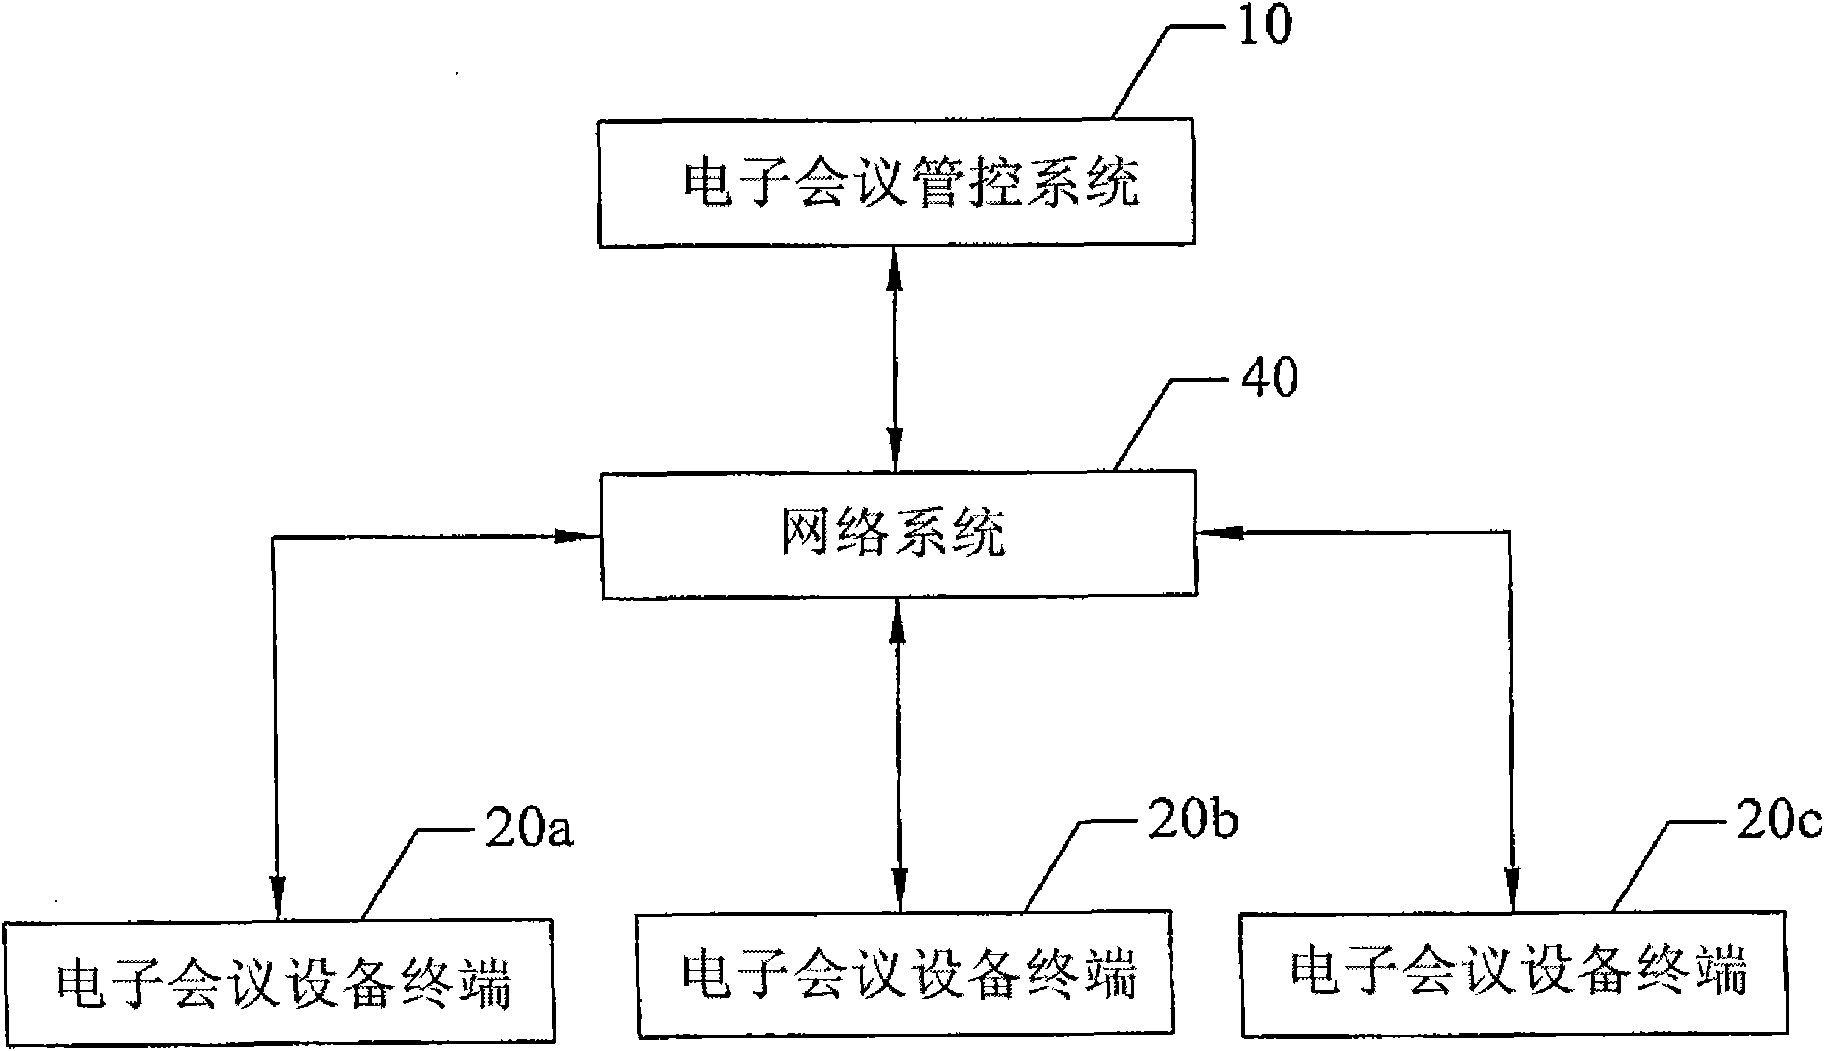 Control method and control system of electronic conferences